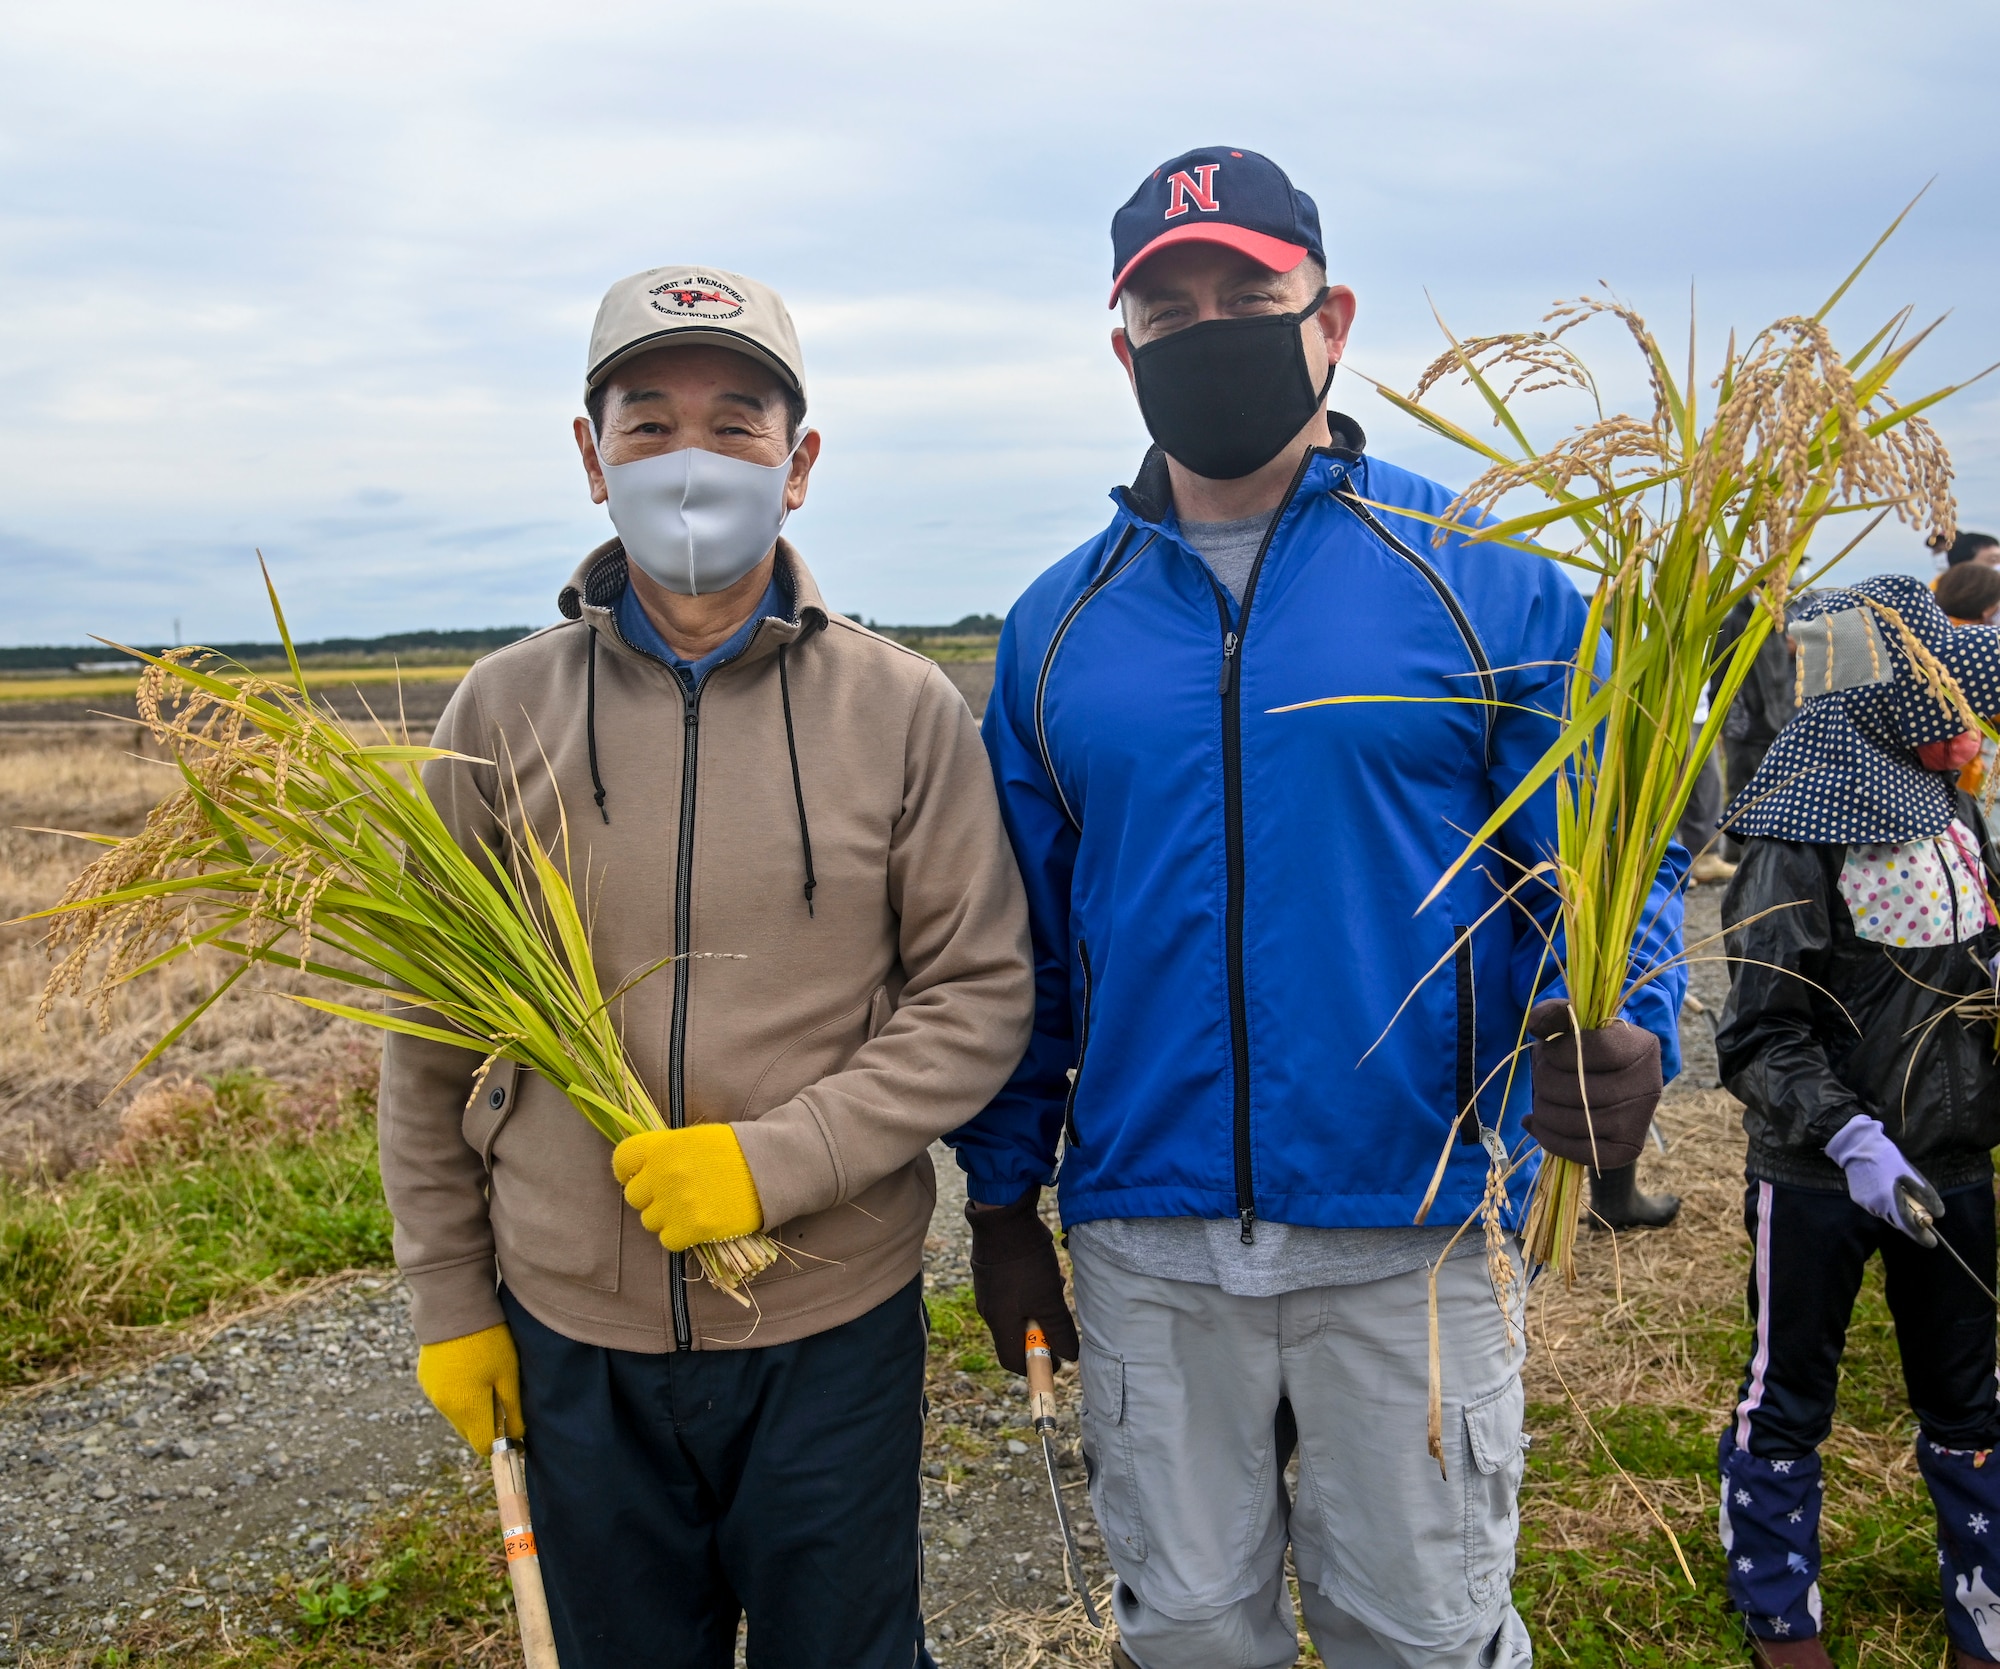 Misawa Mayor Yoshinori Kohiyama, left, and U.S. Air Force Col. Jesse J. Friedel, 35th Fighter Wing commander, pose for a photo during a community relations event in Misawa City, Japan, Oct. 8, 2020. Kohiyama and Friedel joined students from Oozora Elementary School to harvest rice. (U.S. Air Force photo by Tech. Sgt. Timothy Moore)